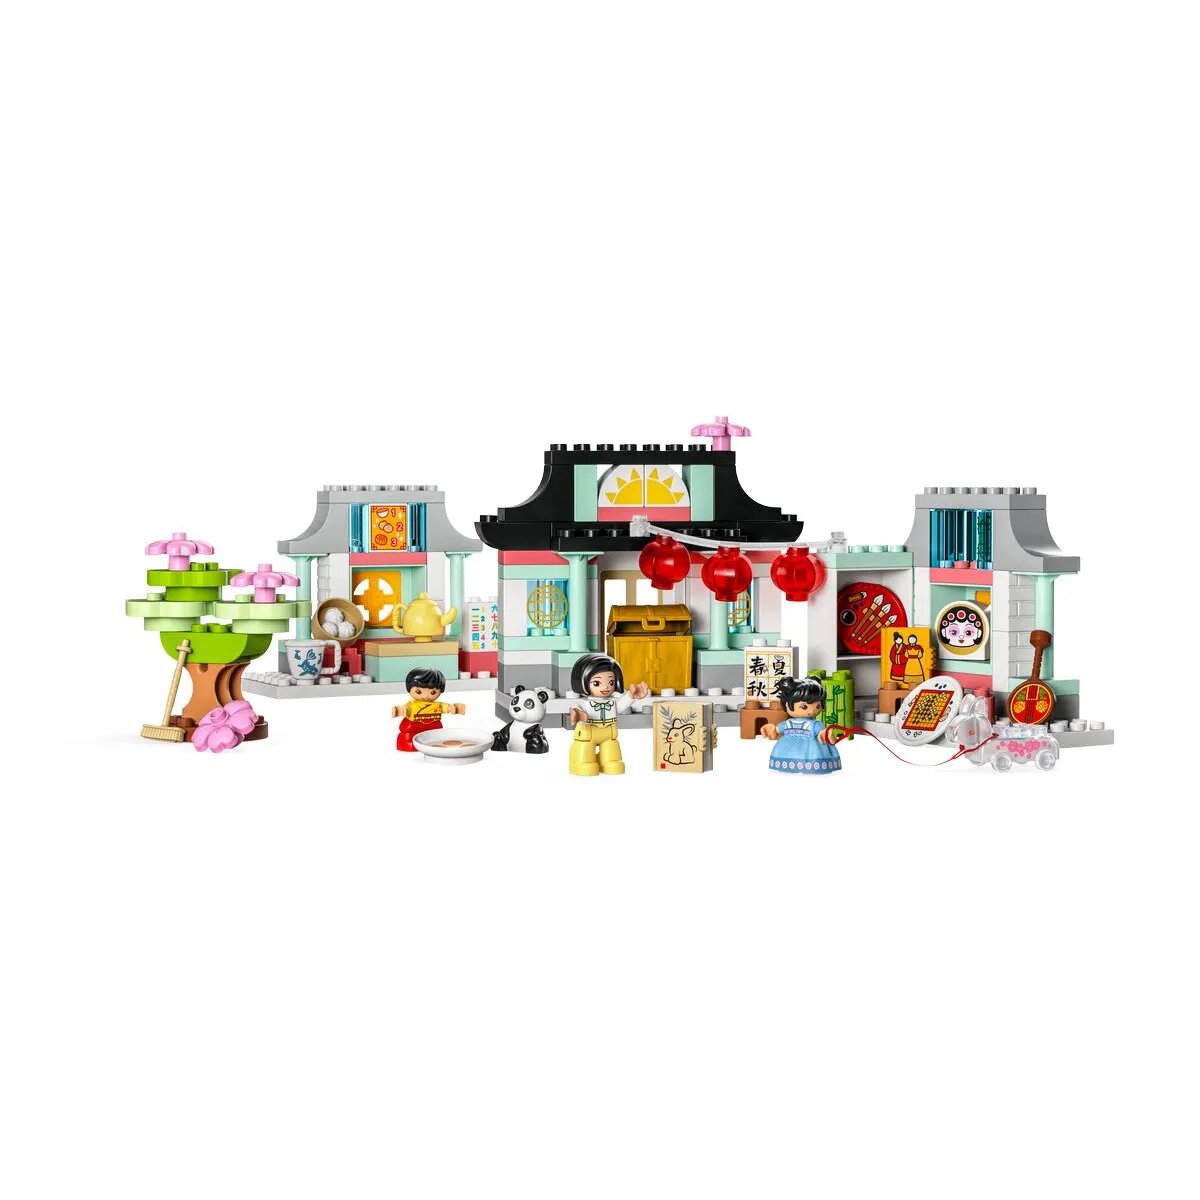 LEGO® DUPLO® Town 10411 Learn about Chinese culture